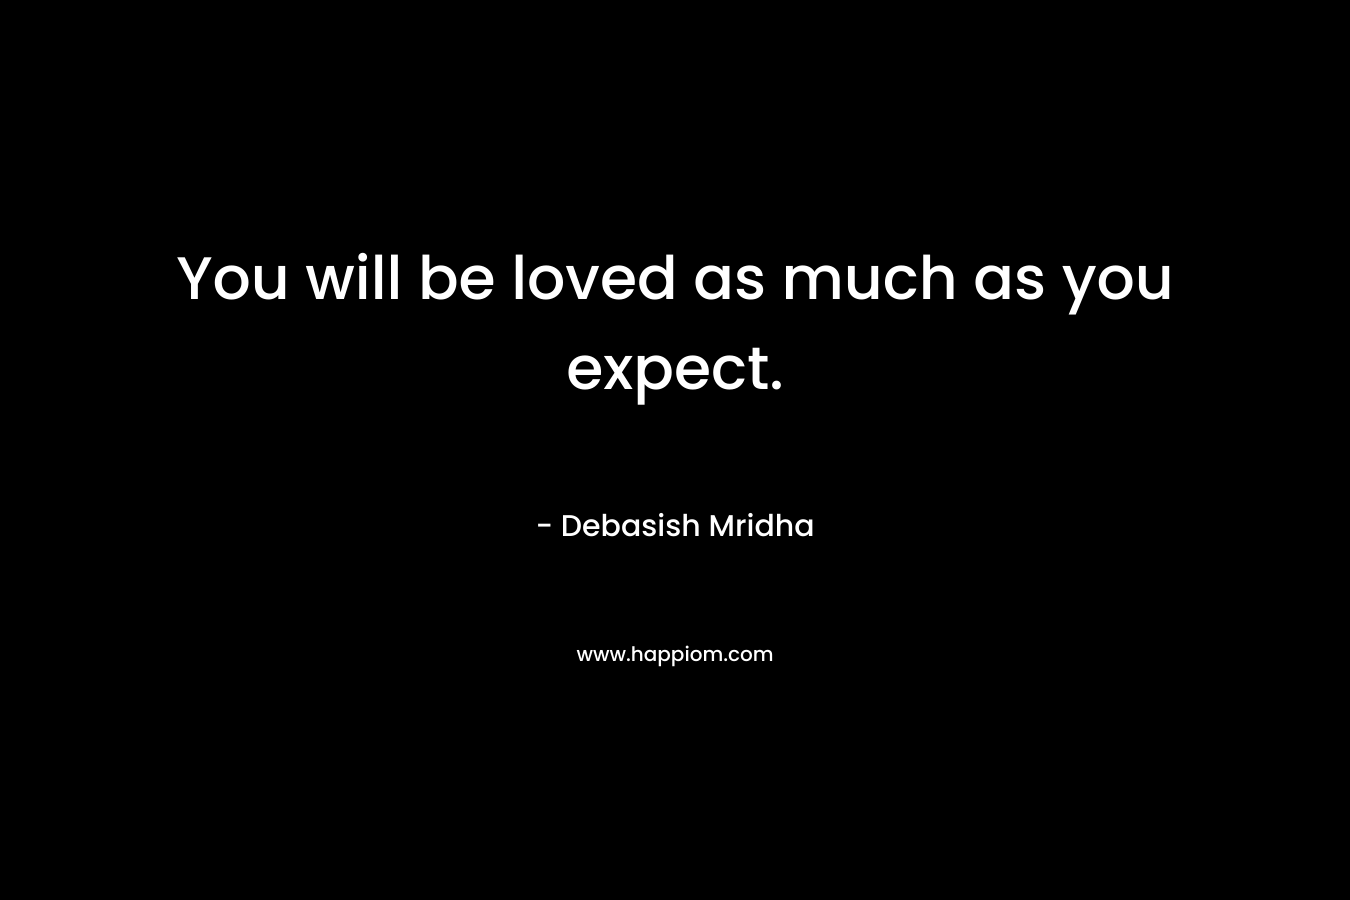 You will be loved as much as you expect.